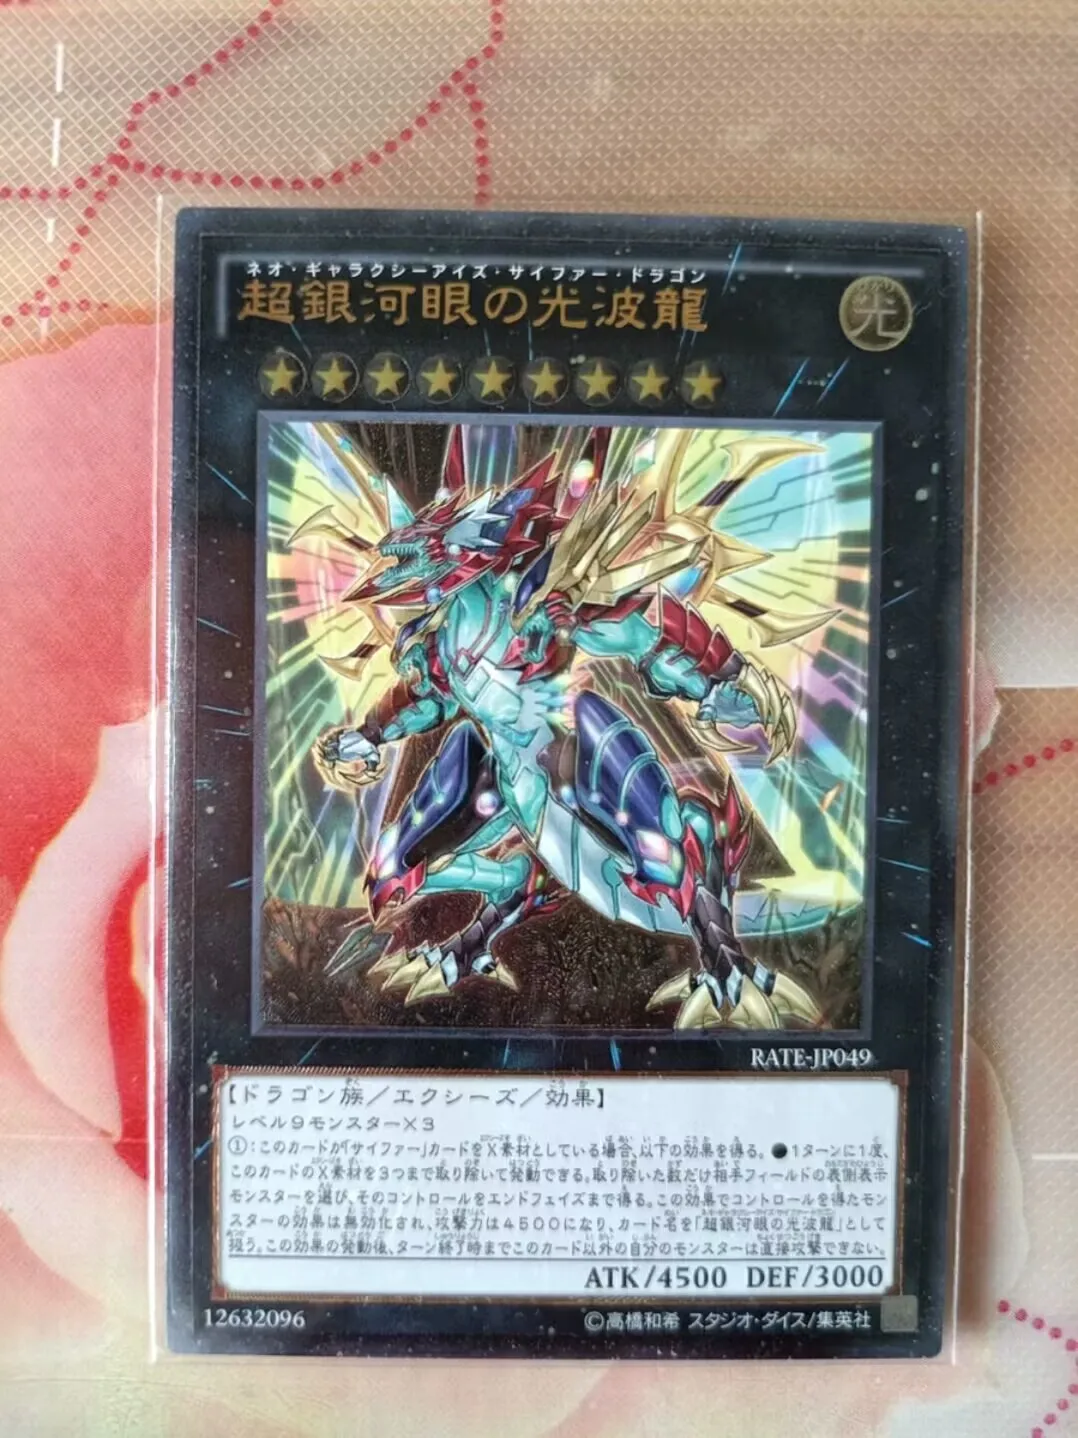 

Master Duel RATE-JP049 - Yugioh - Japanese - Neo Galaxy-Eyes Cipher Dragon - Ultimate Collection Mint Card